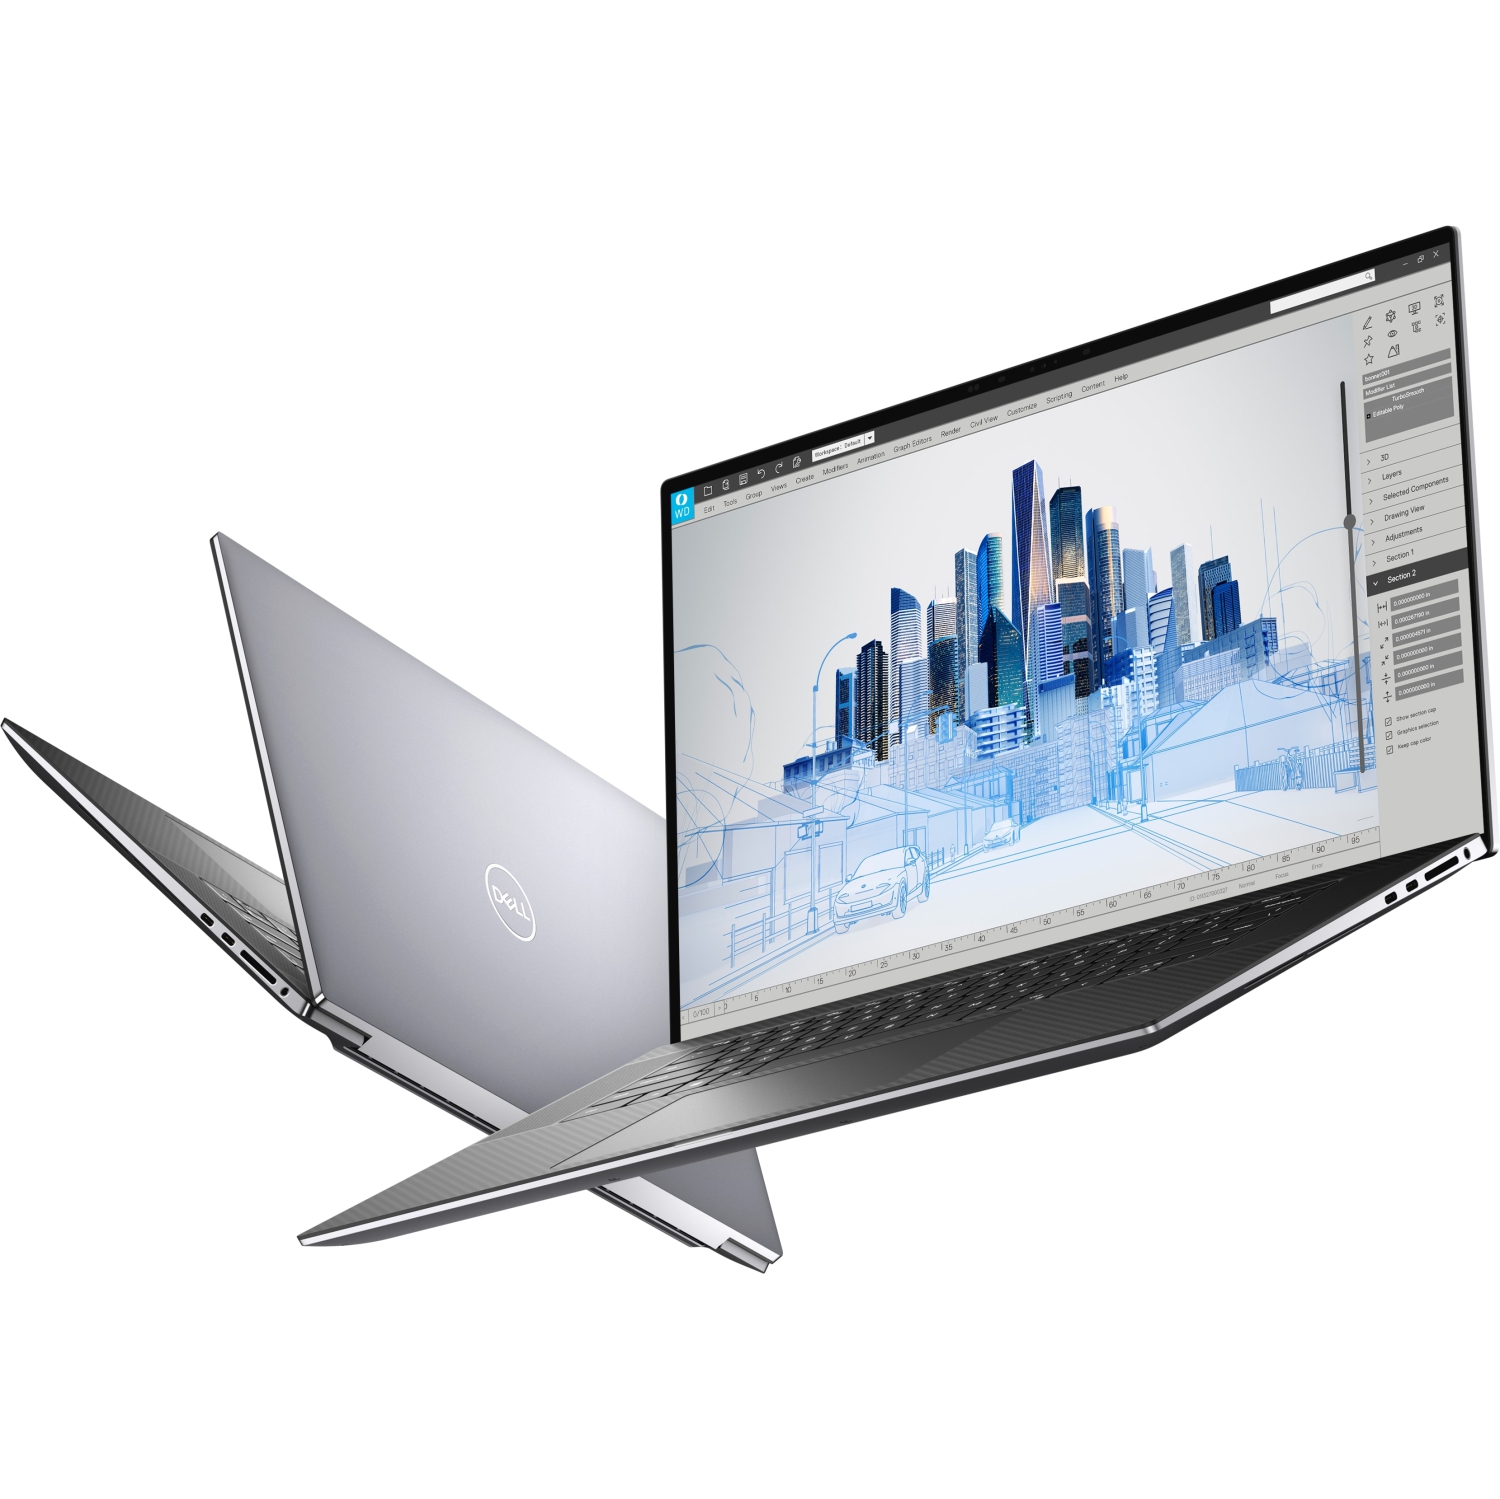 Refurbished (Excellent) – Dell Precision 5000 5760 Workstation Laptop (2021) | 17" FHD+ | Core i7 - 256GB SSD - 16GB RAM - RTX A2000 | 8 Cores @ 4.8 GHz - 11th Gen CPU